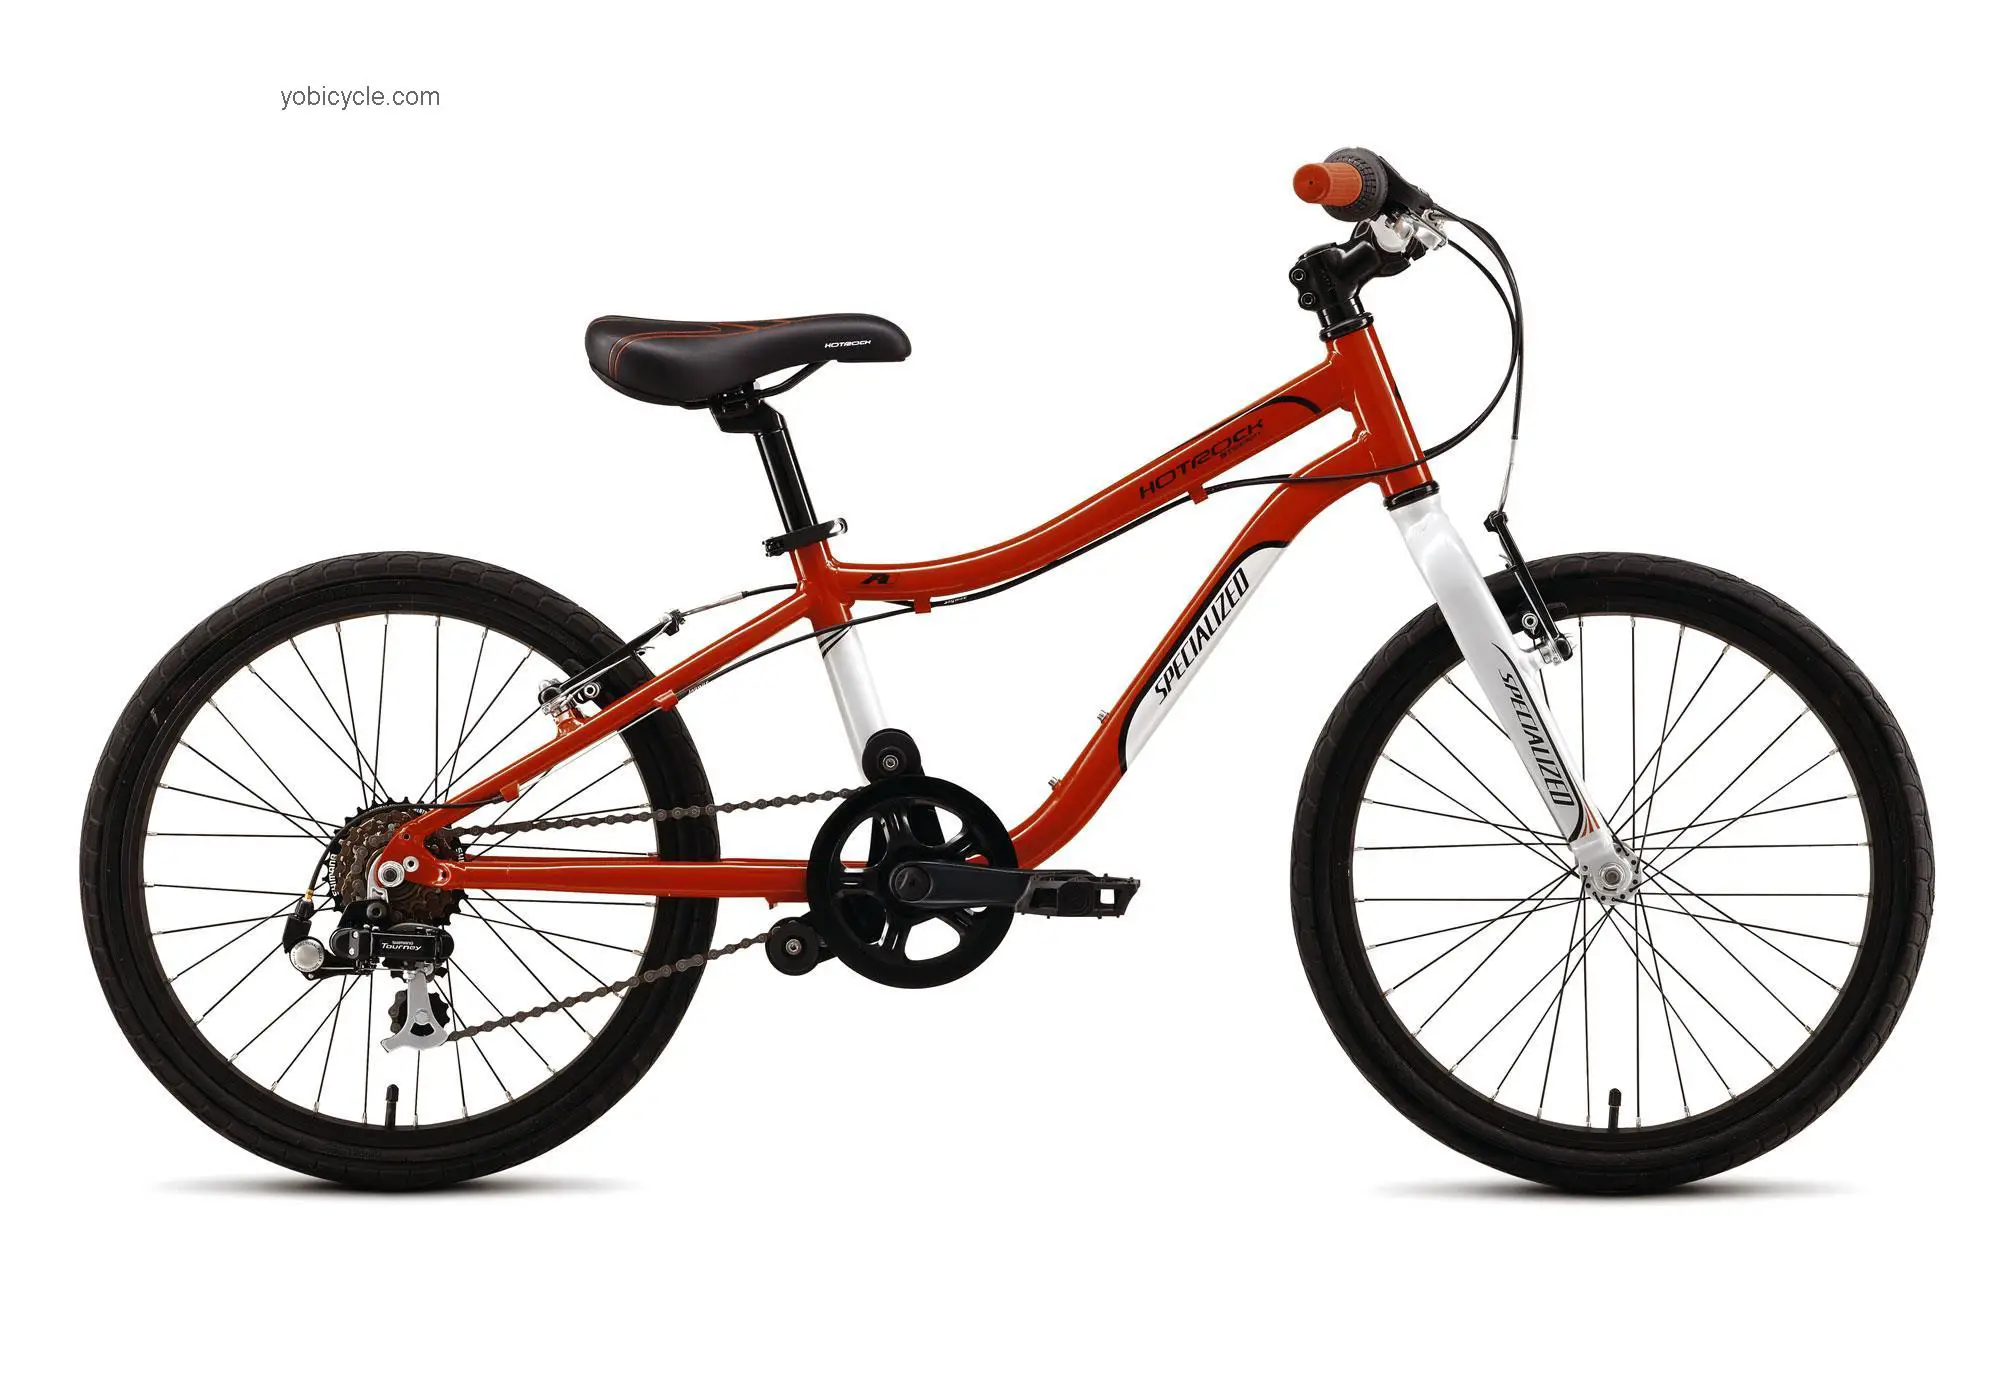 Specialized Hotrock 20 Street Boys competitors and comparison tool online specs and performance